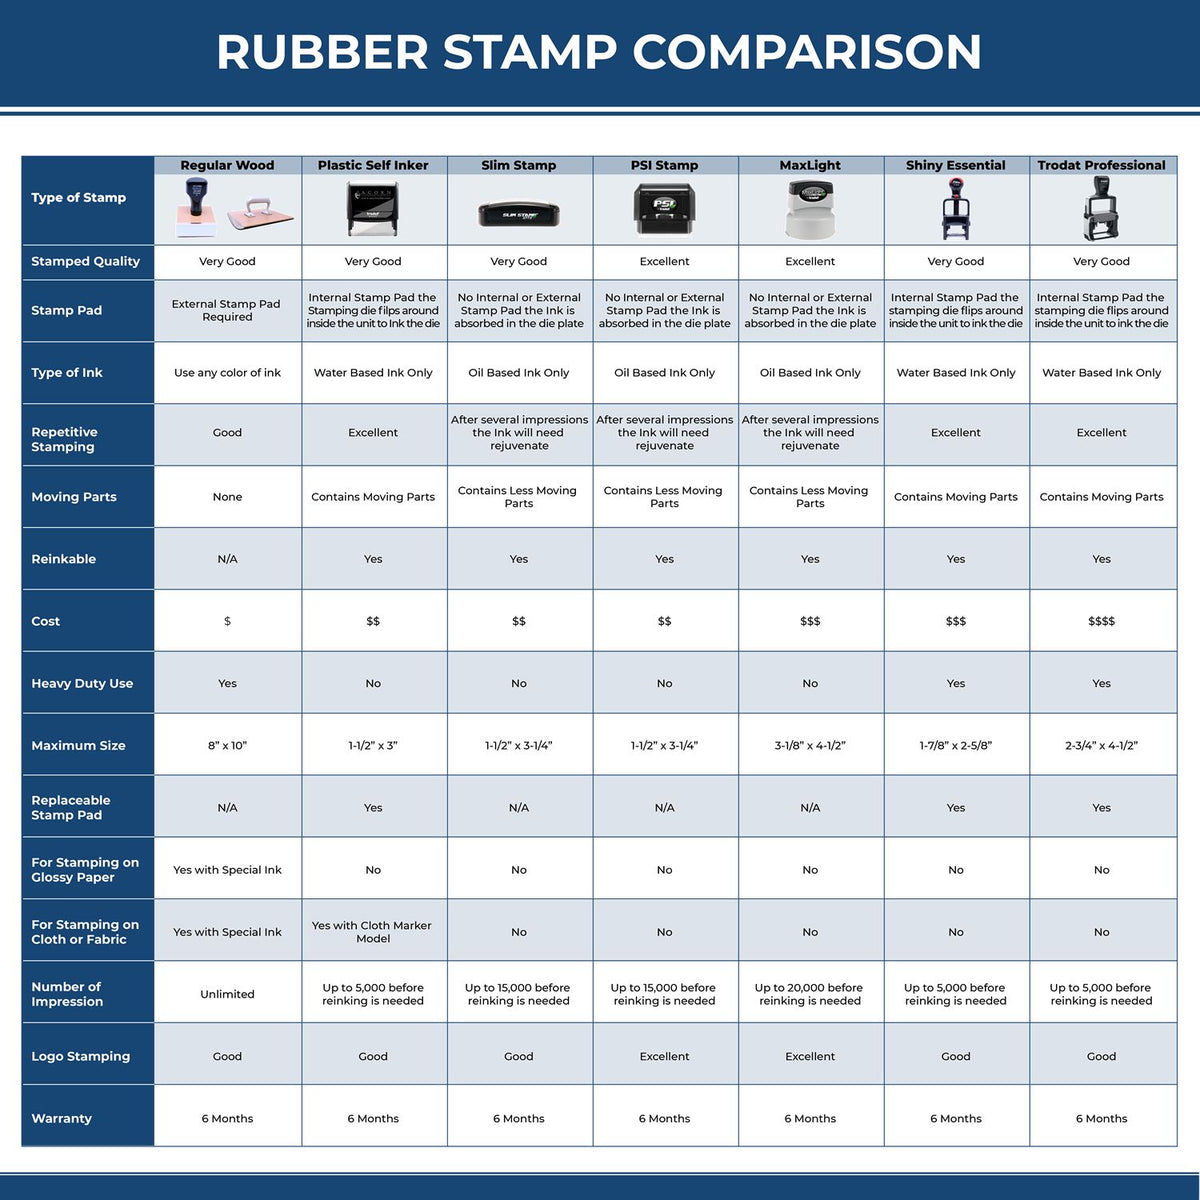 A comparison chart for the different types of mount models available for the Premium MaxLight Pre-Inked New York Engineering Stamp.